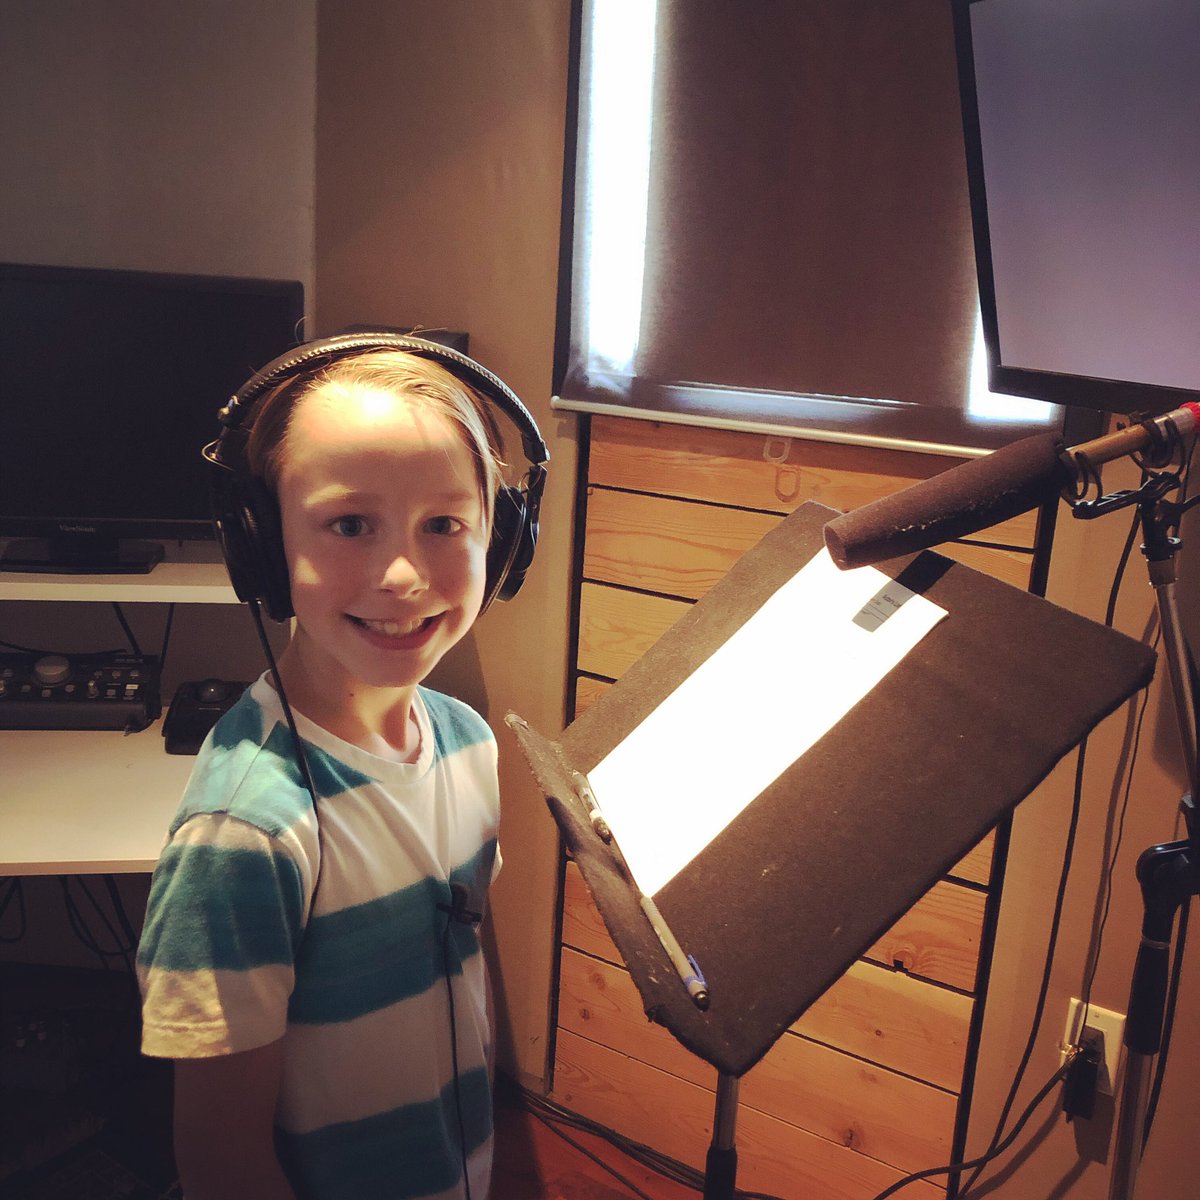 Just a little ADR to finish up an exciting project! 🎬 #workingactor 
.
.
.
.
.
.
#adr #adrsession #thatsawrap #hollywoodnorth #comingsoon #leadactor #excited #grateful #dreamscometrue